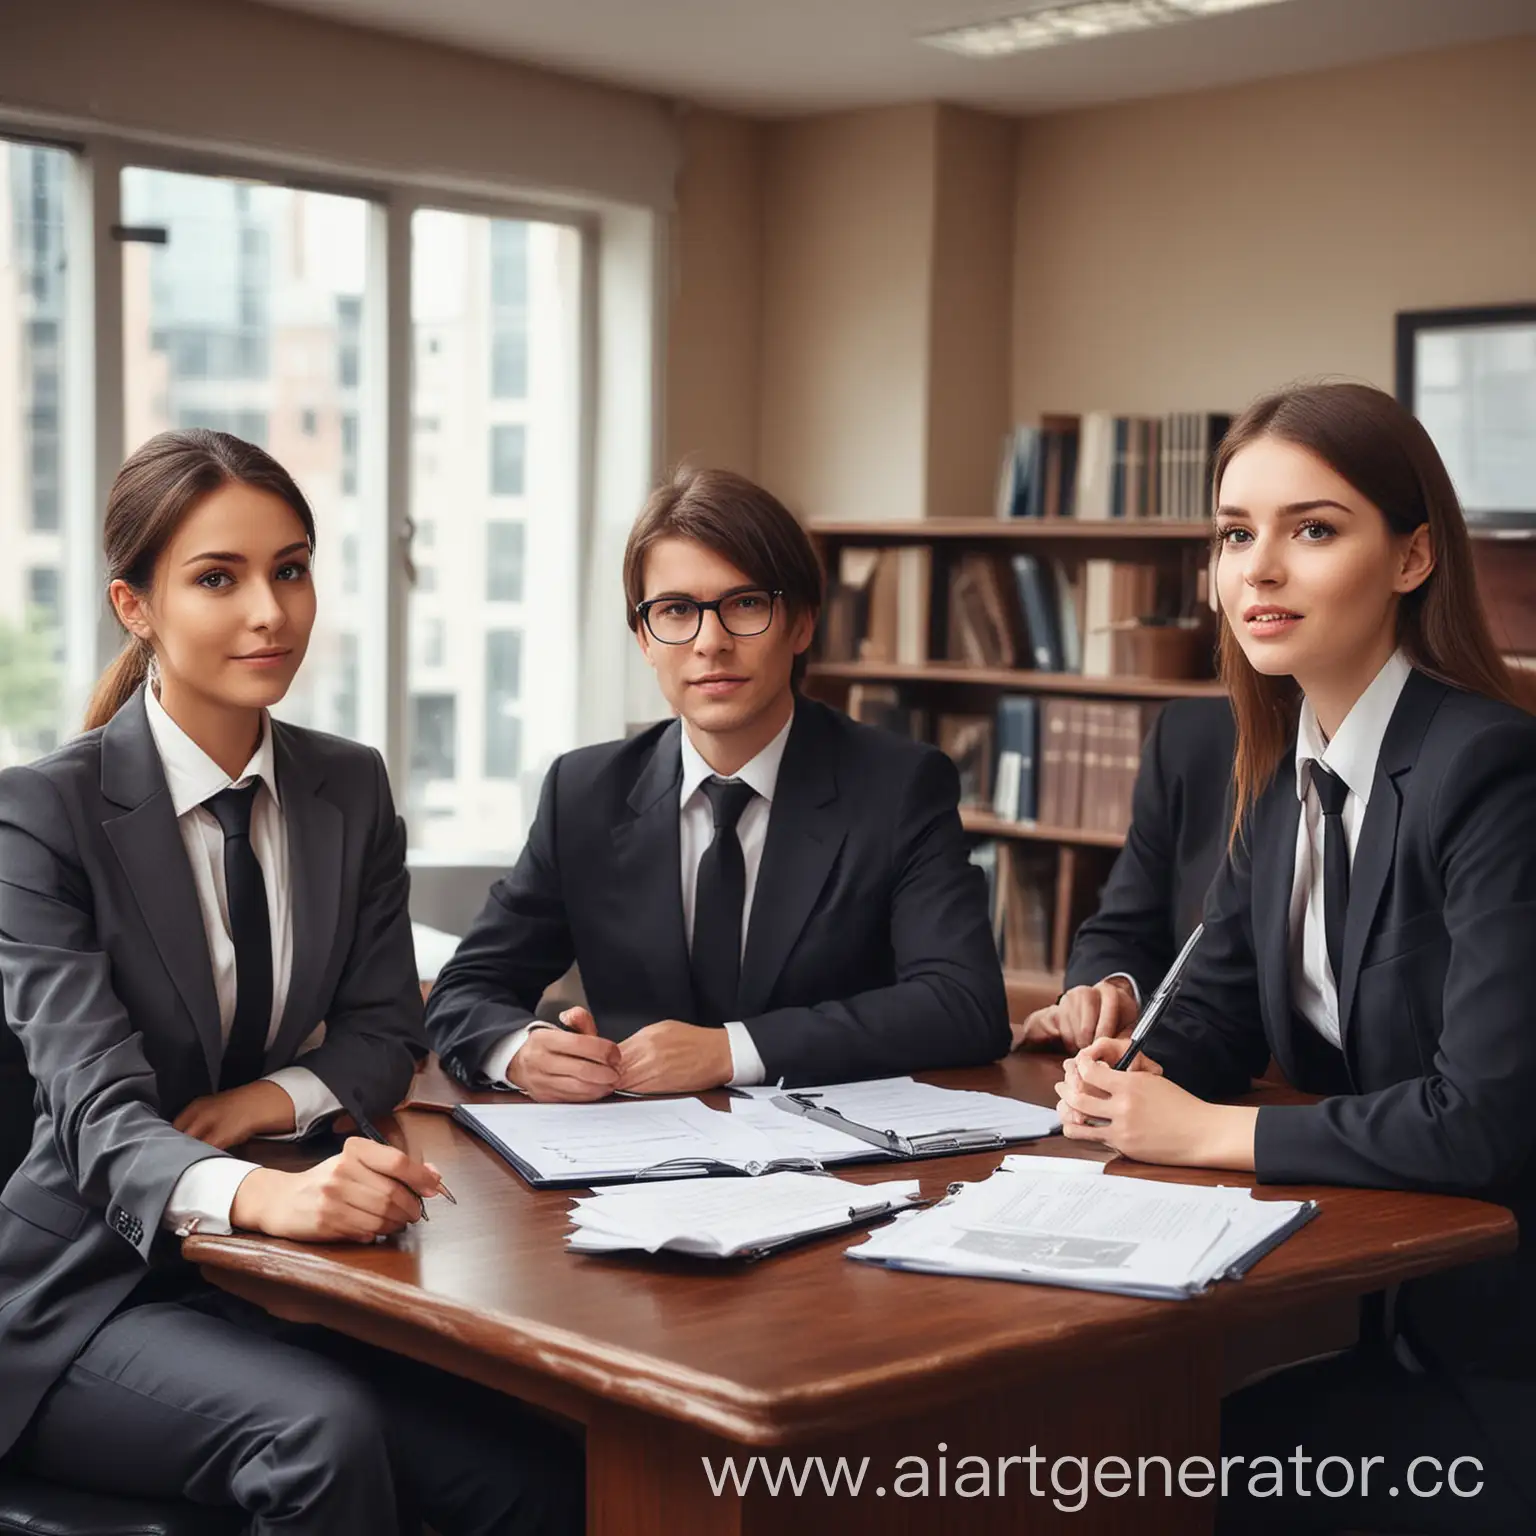 Professional-Lawyers-Working-in-Office-Environment